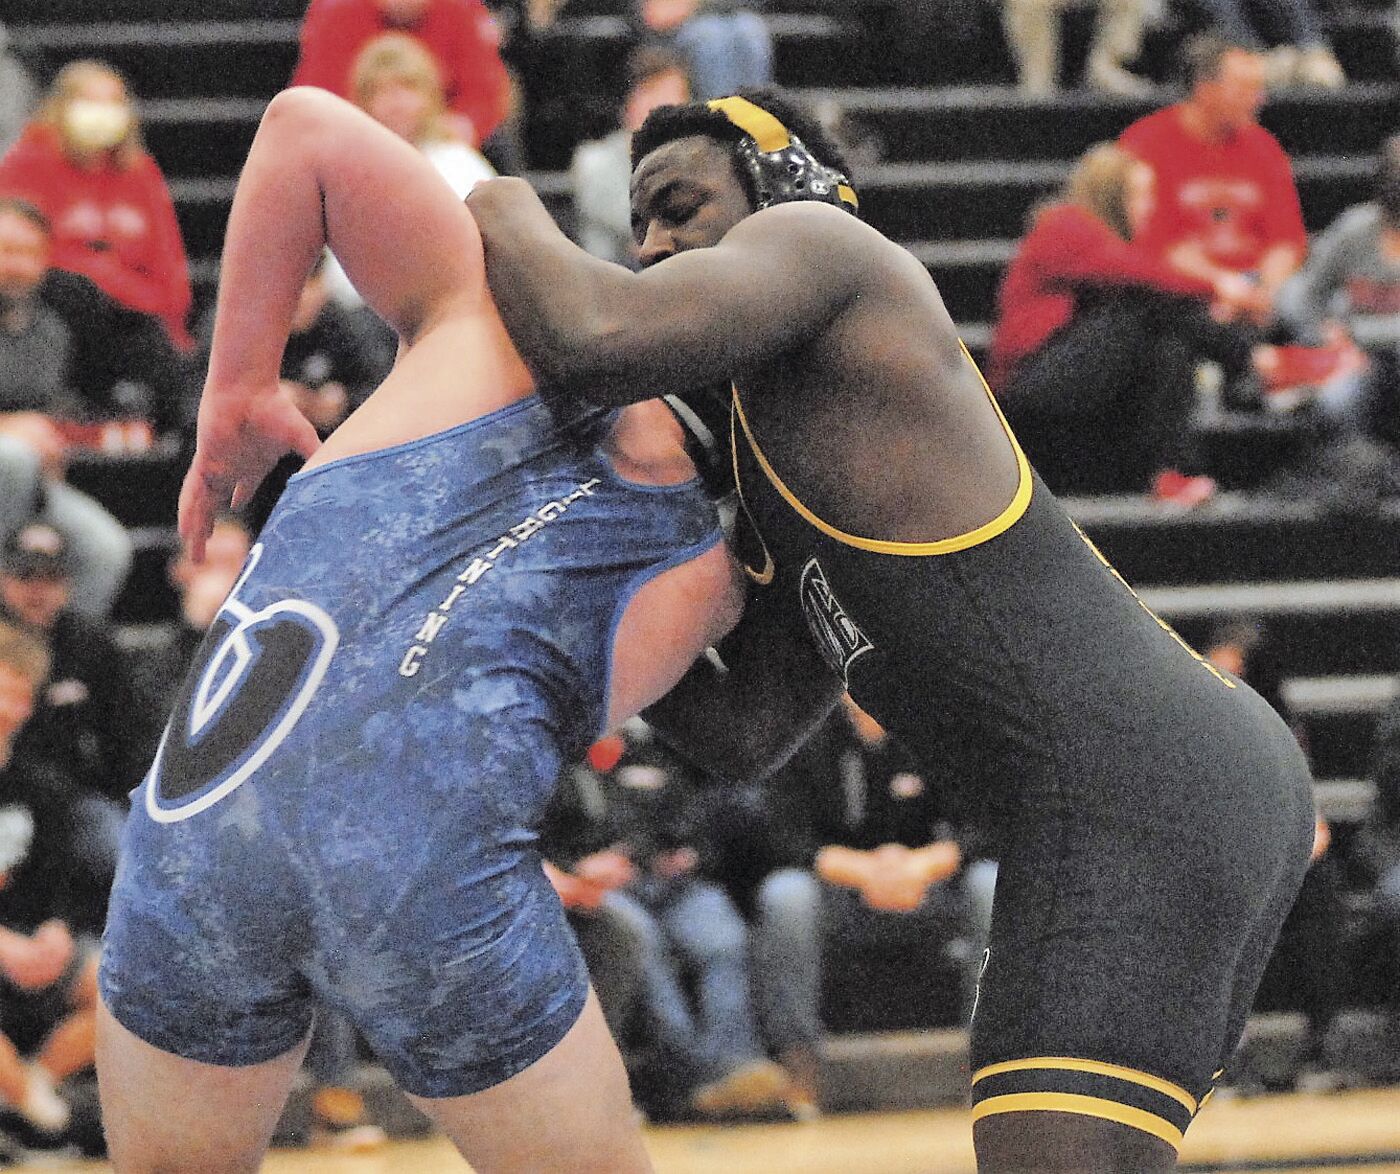 Large SSC contingent heading for state wrestling | Sports